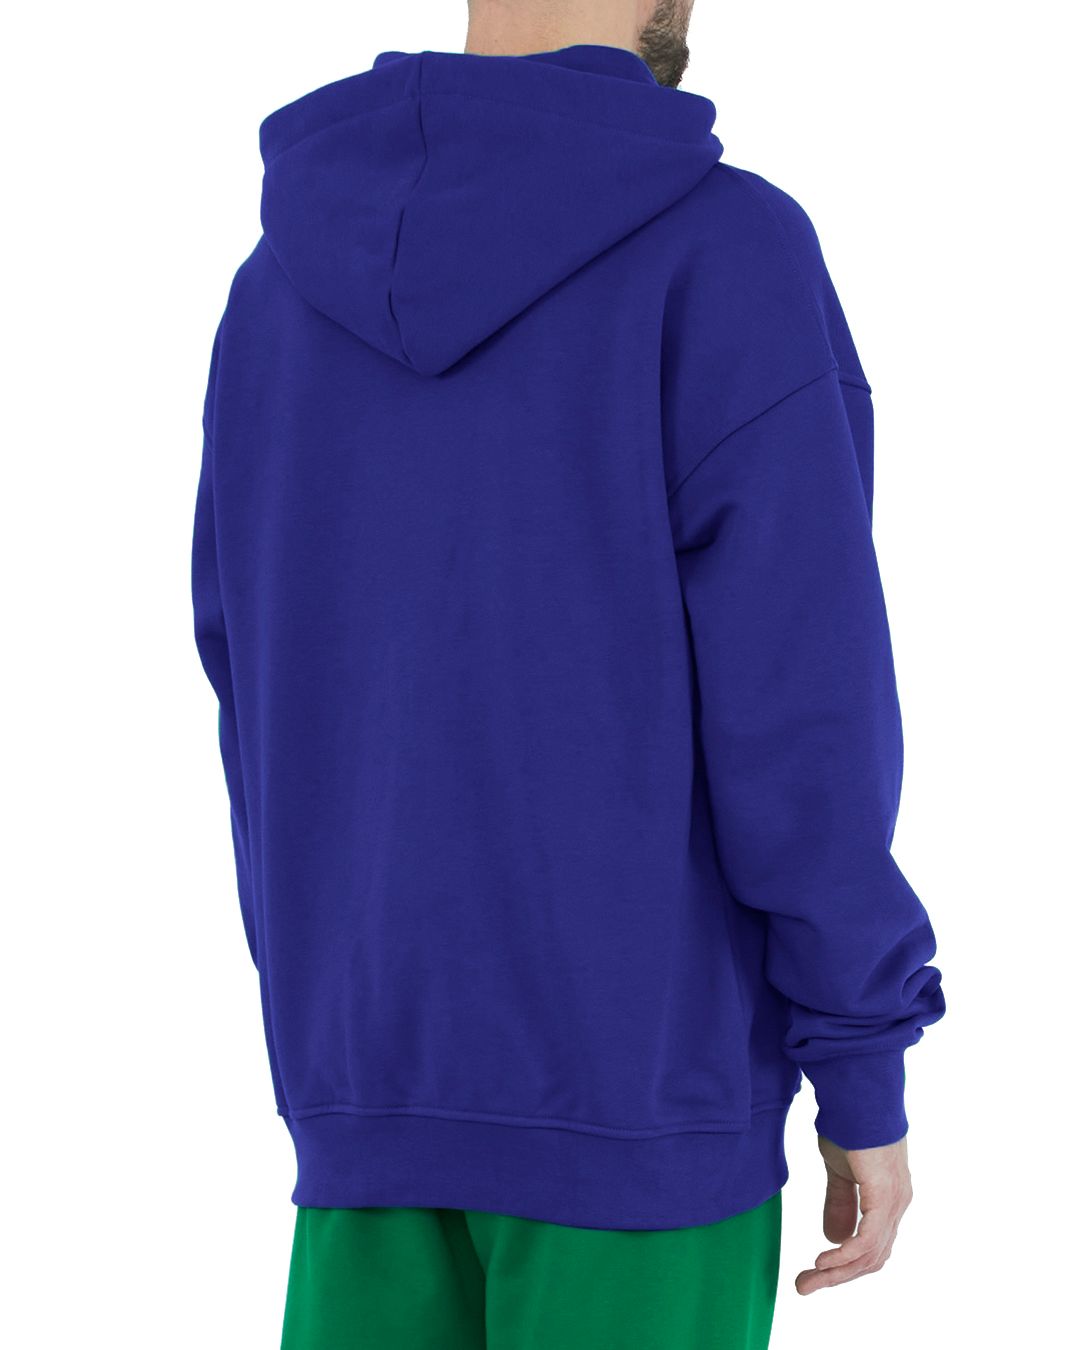 Blue Cotton Hooded Sweatshirt with Bold Print